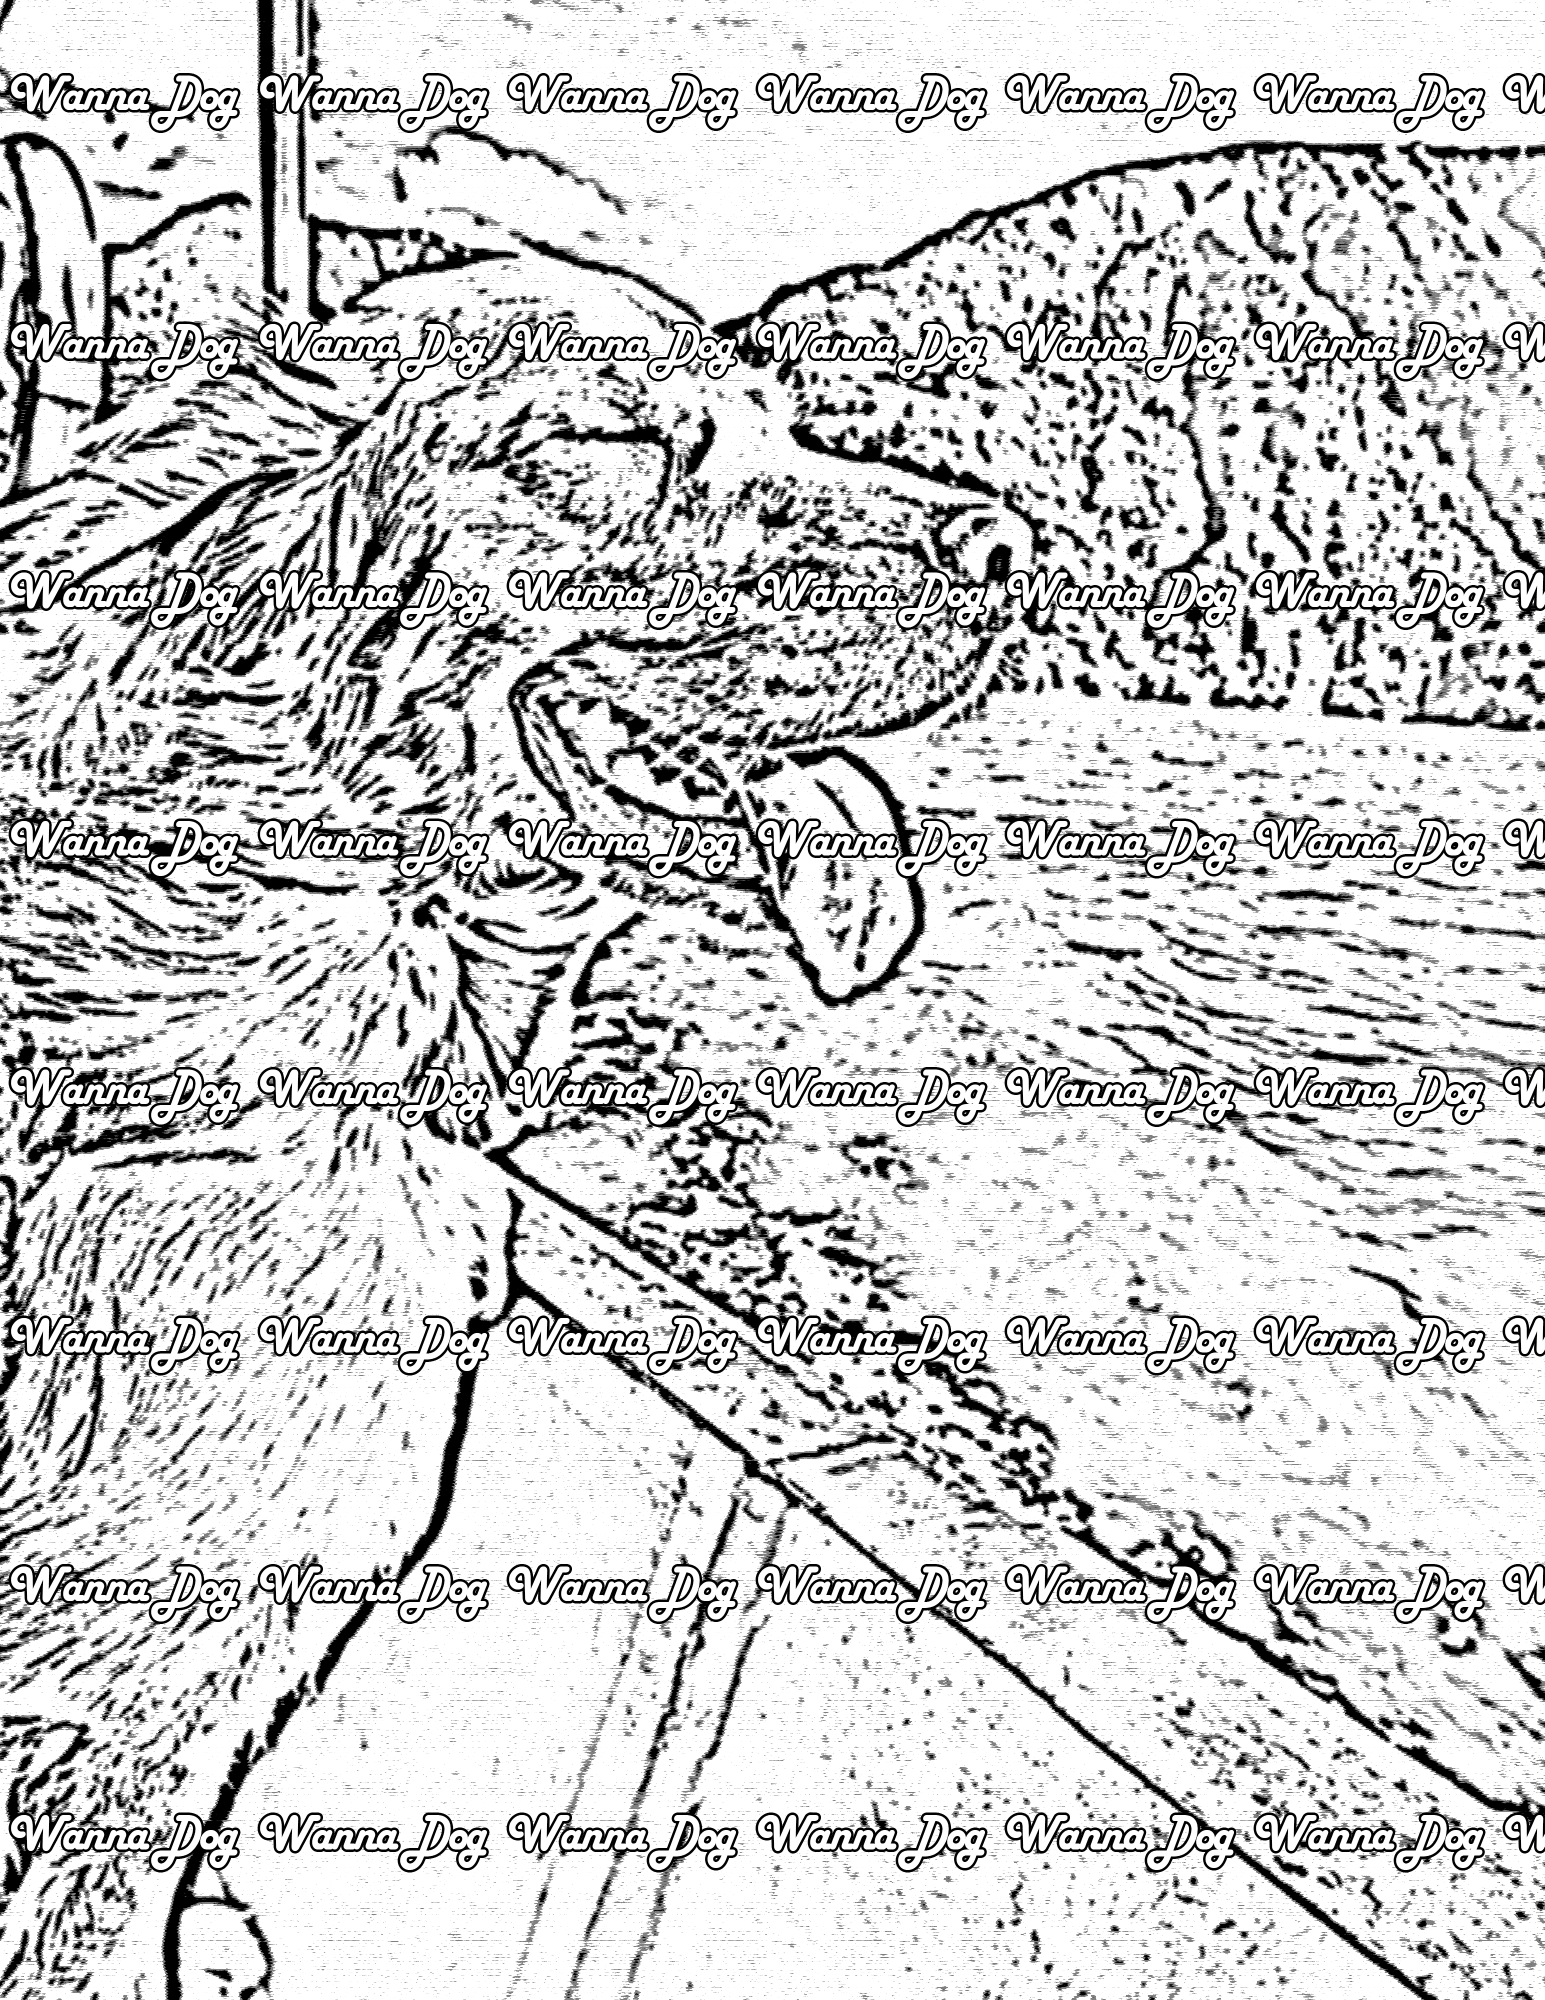 Golden Retriever Coloring Page of a Golden Retriever on a boat in the water smiling with their tongue out and wind blowing in their hair 